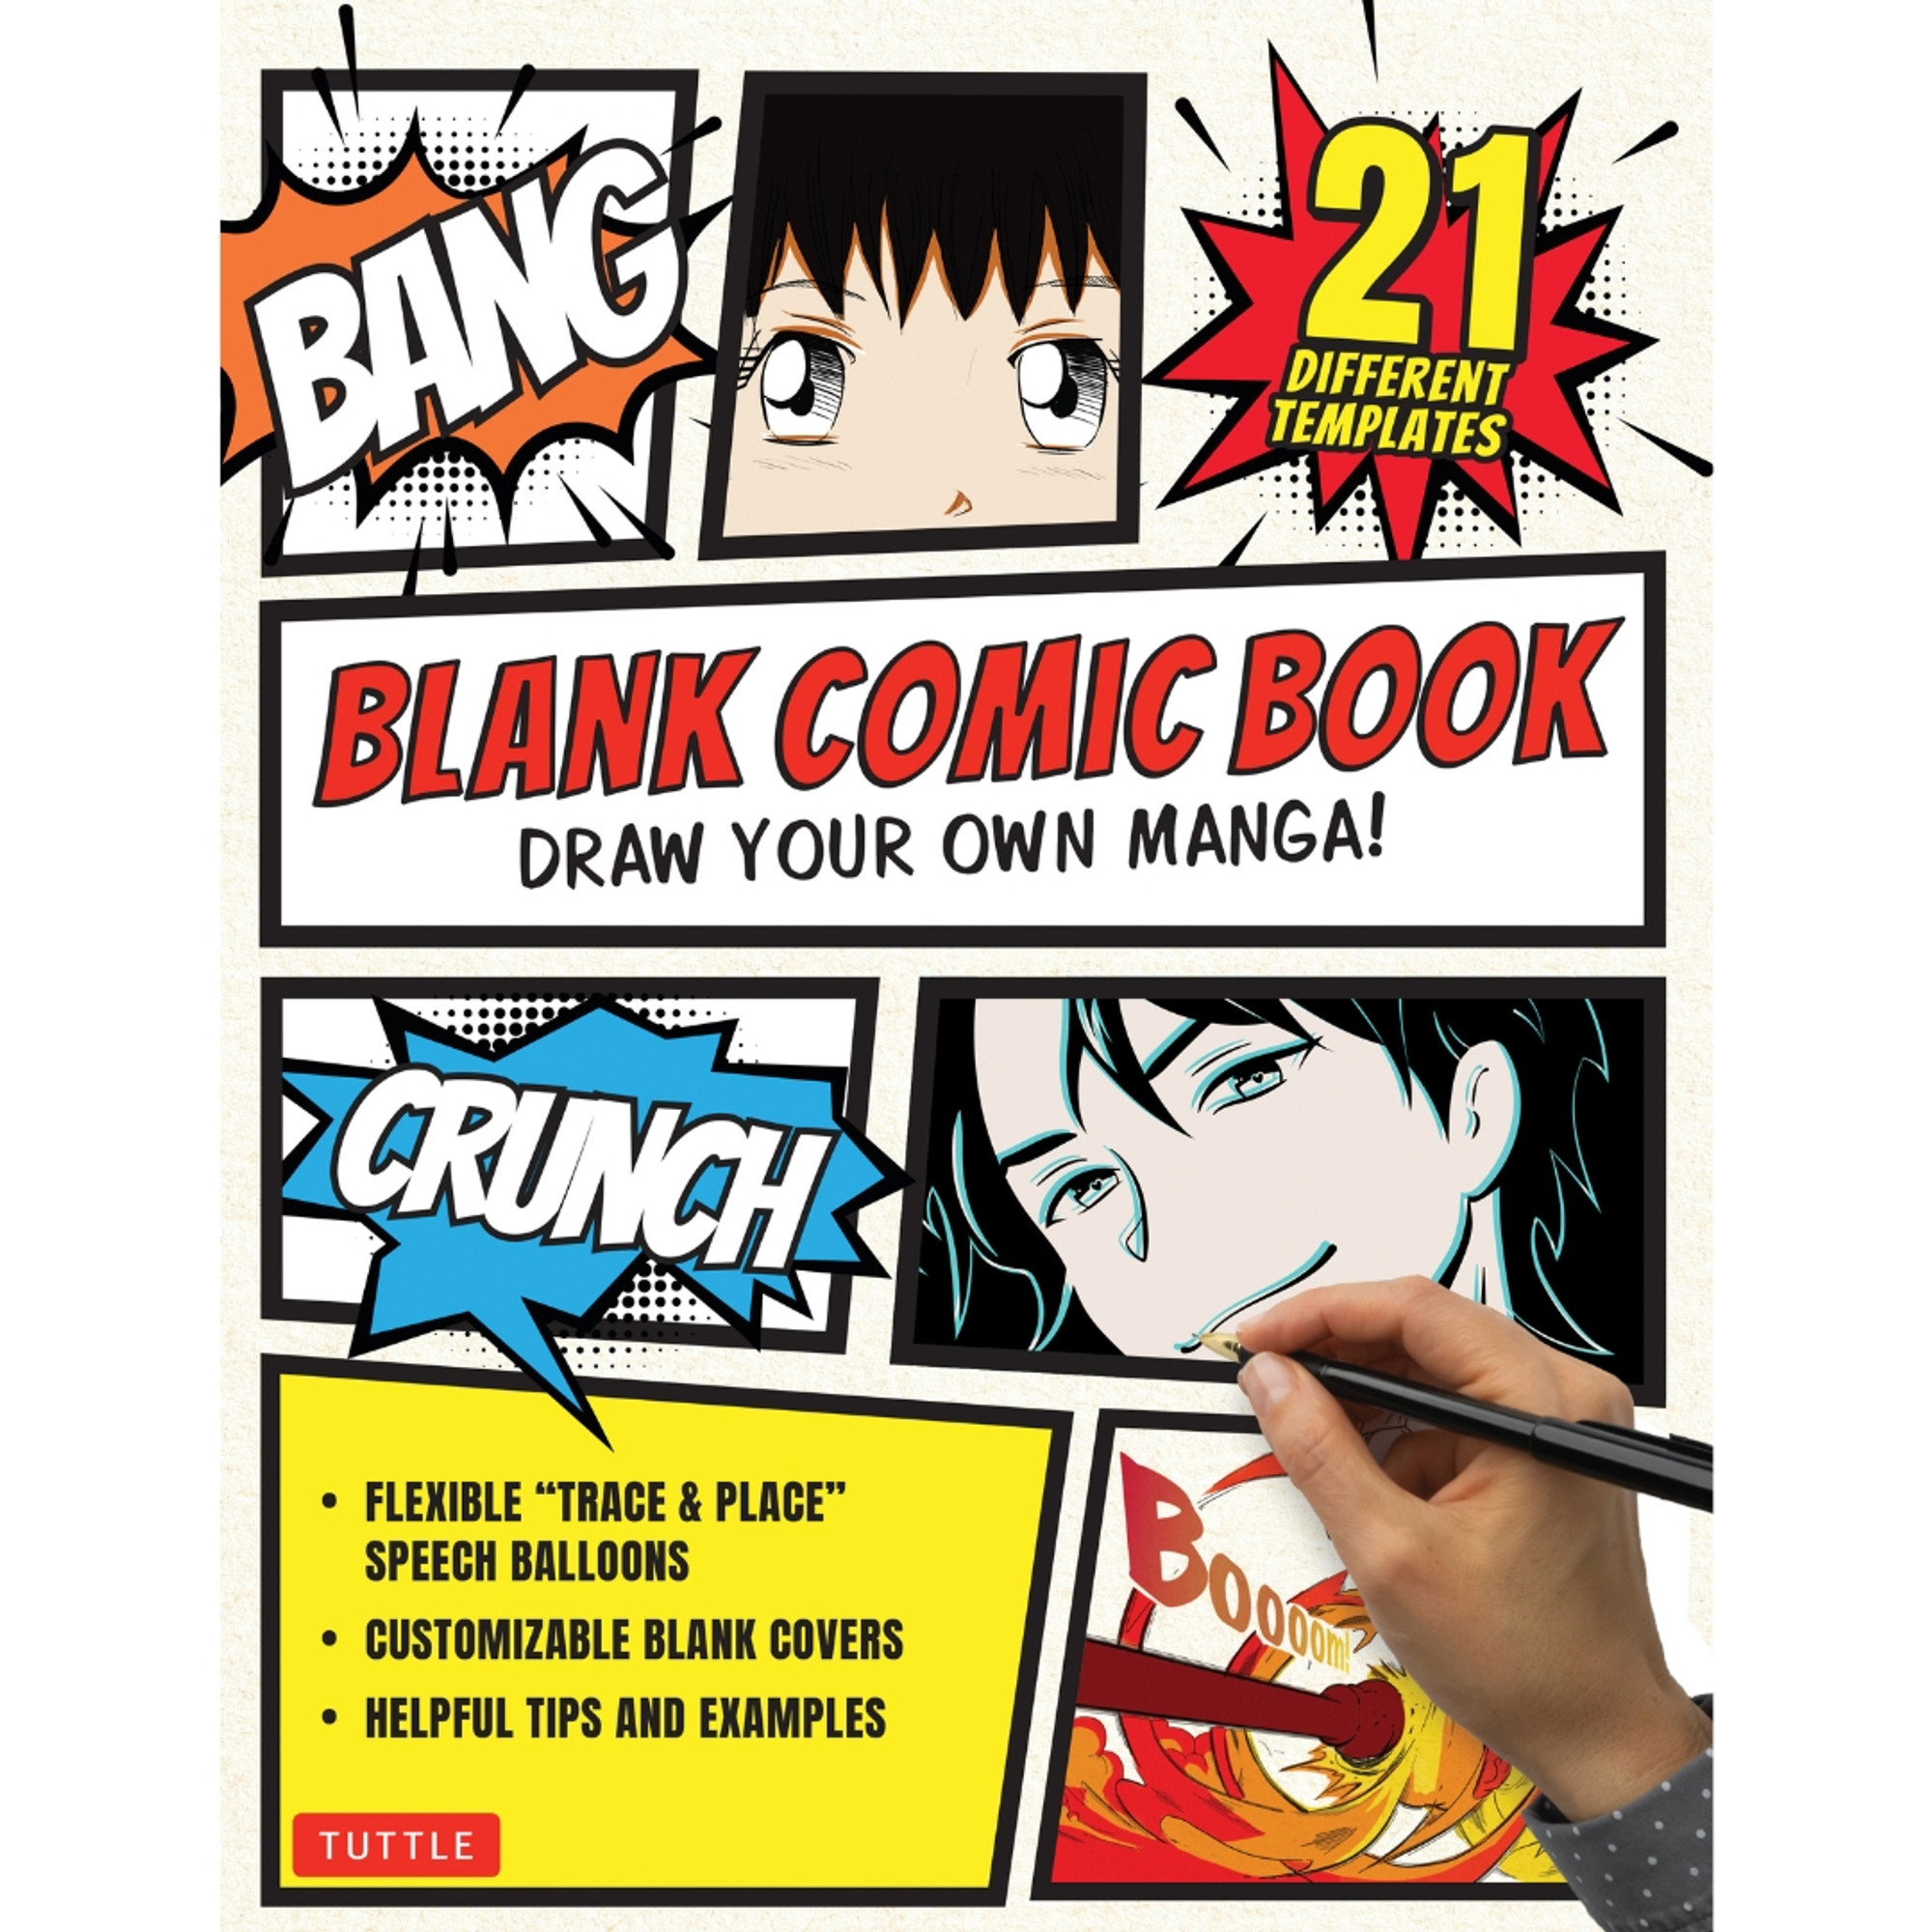 Buy Blank Comic Book: Create Your Own Graphic Novel with a Variety of  Templates - Bright Colors from Japan - Buy authentic Plus exclusive items  from Japan